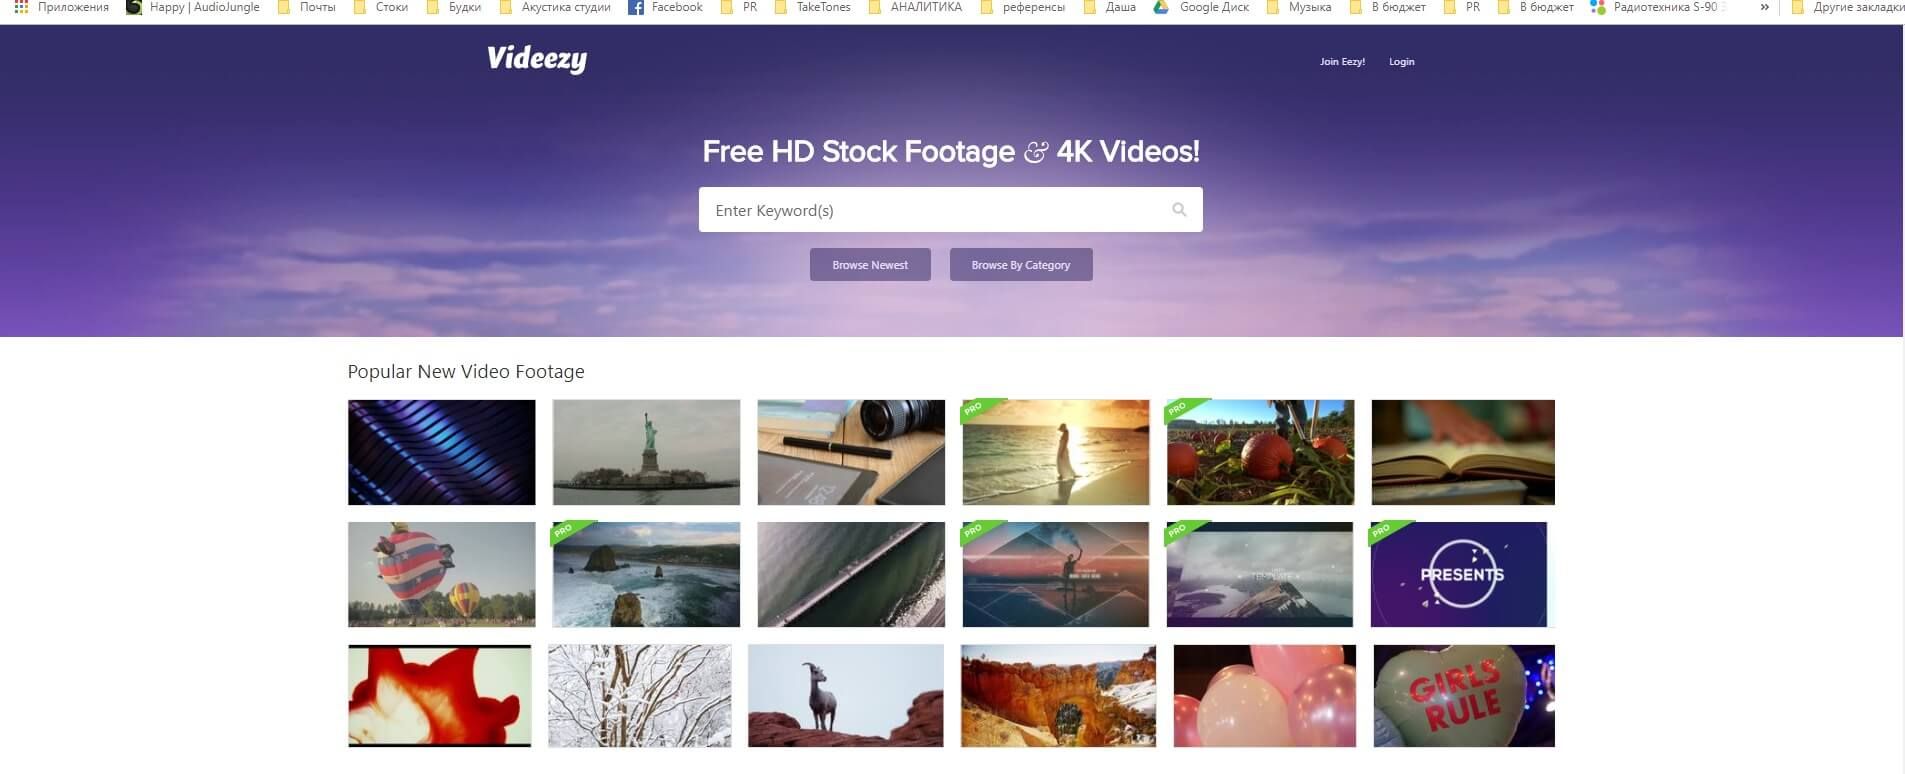 Videezy free stock footage main page